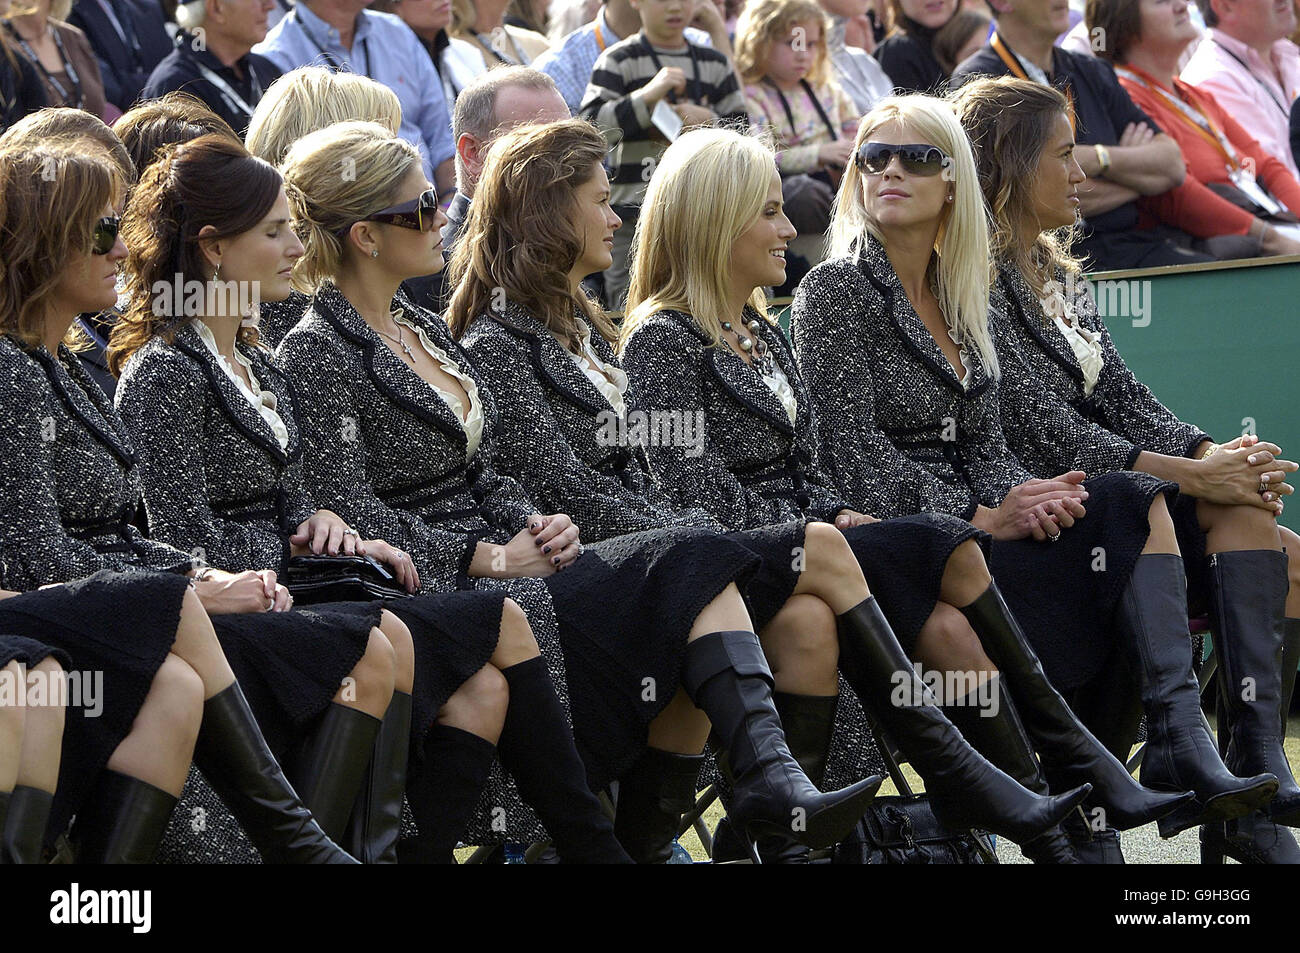 Golf - Ryder Cup opening ceremony - K Club, Co Stock Photo